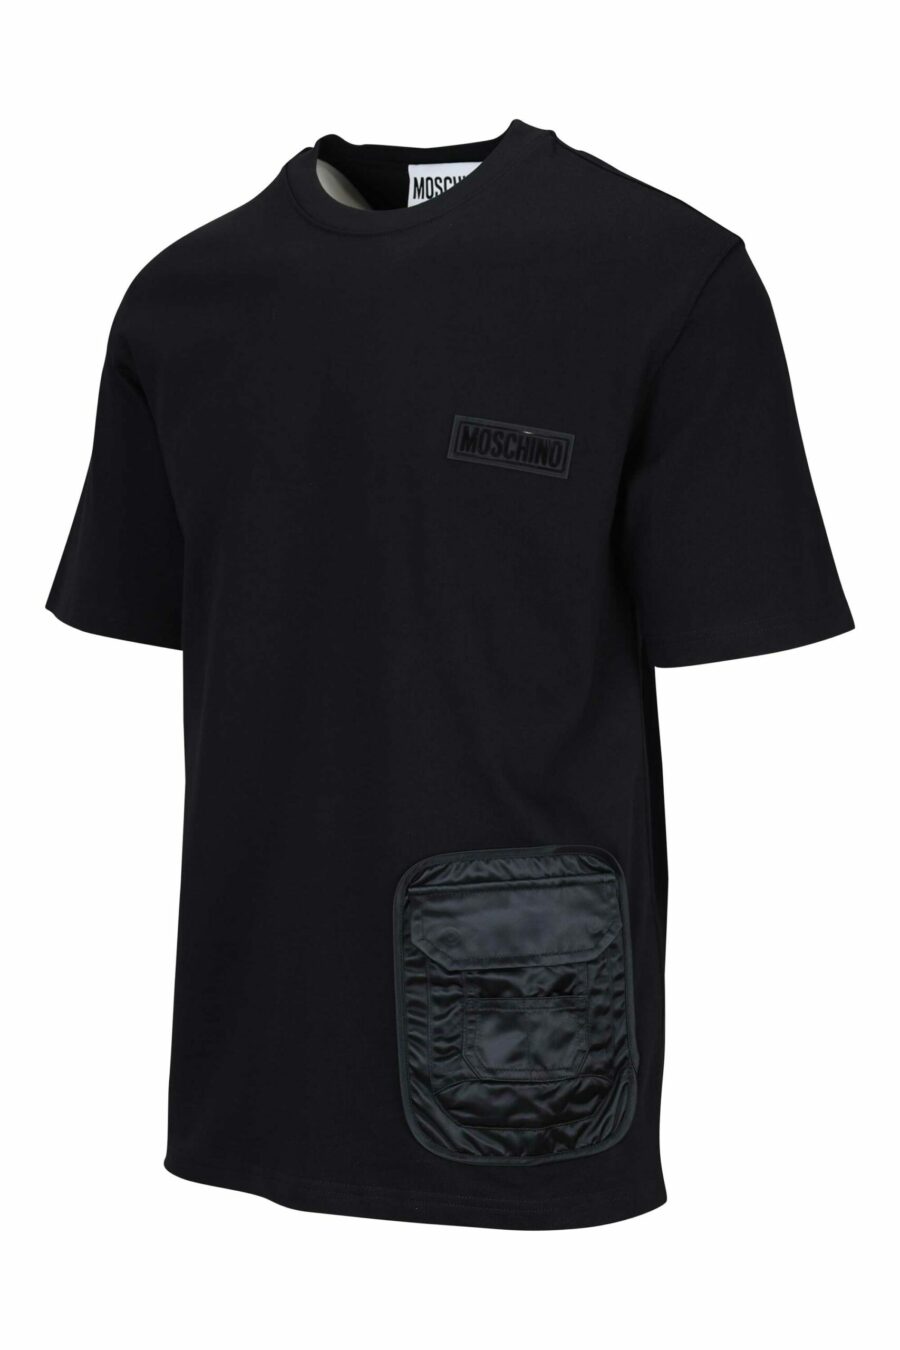 Black T-shirt mix with monochrome pocket and logo label - 667113452036 1 scaled